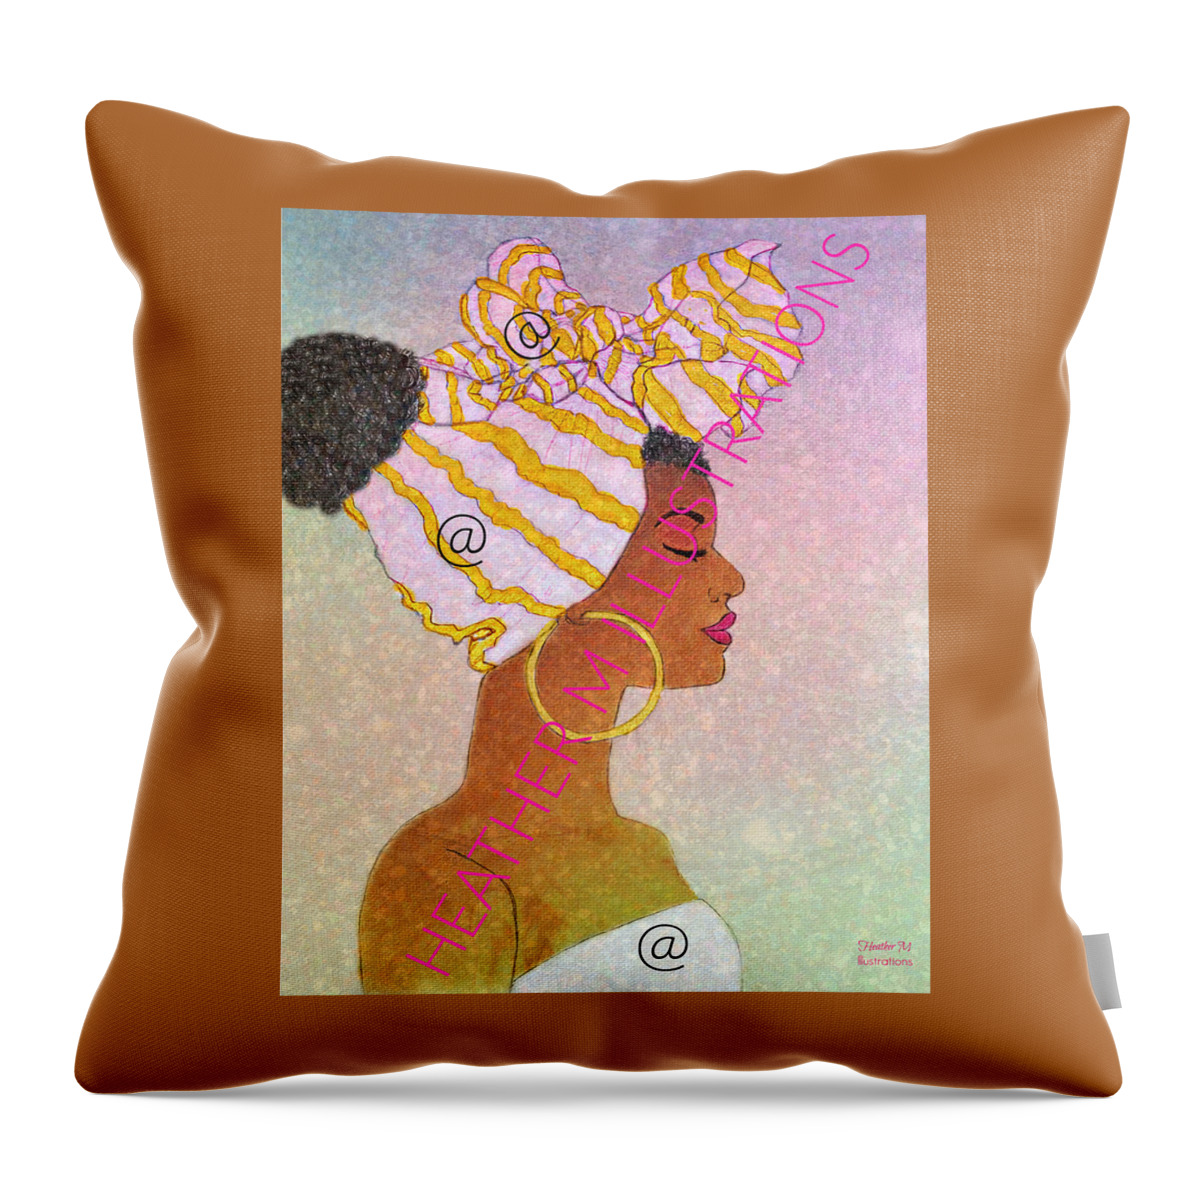 Woman Throw Pillow featuring the mixed media Dream 3 by Heather M Photography and Illustrations